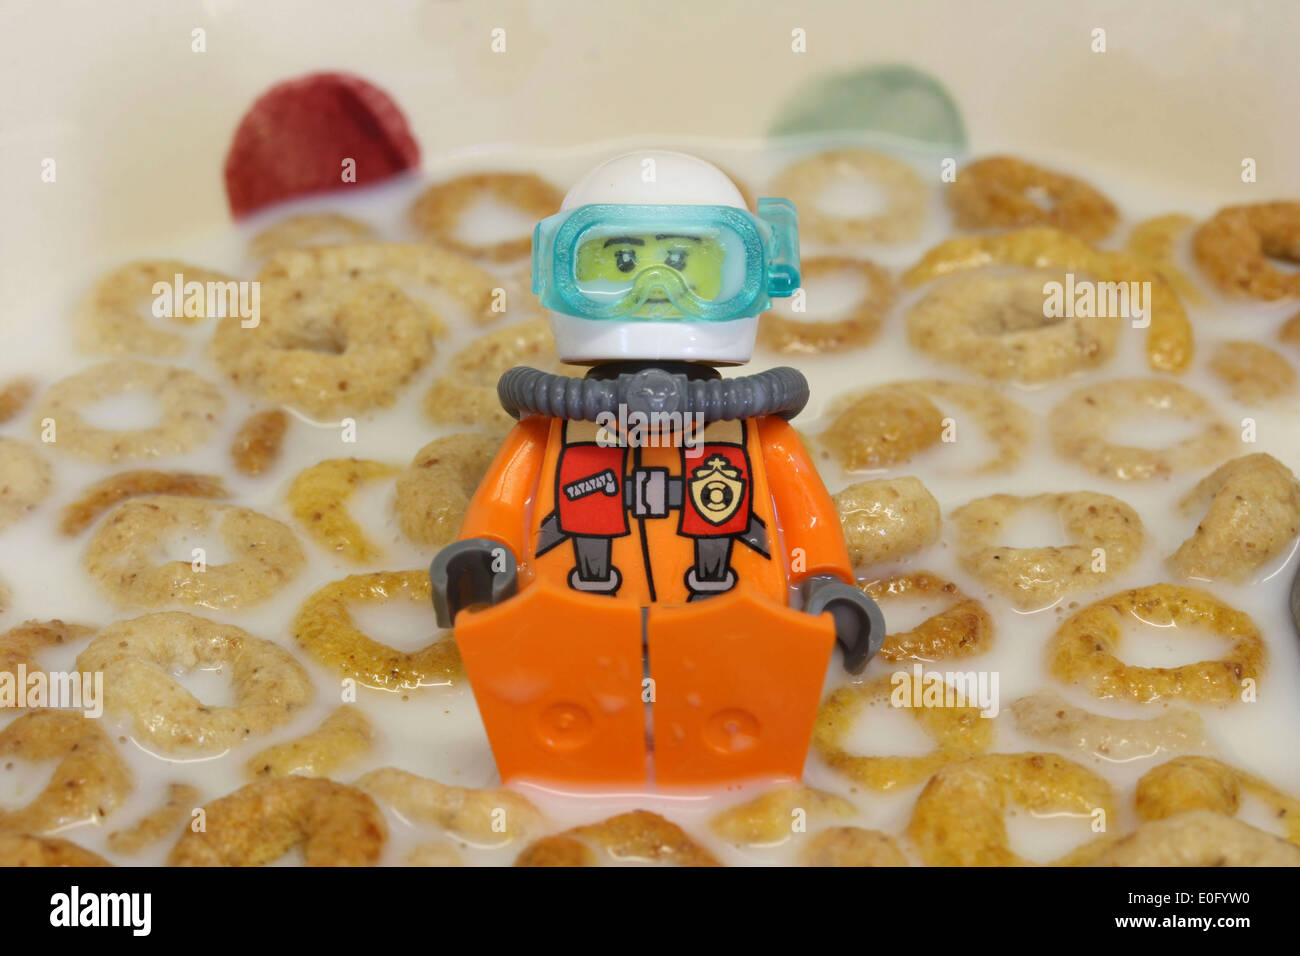 A Lego man diver surfacing in a bowl of breakfast cereal. Stock Photo